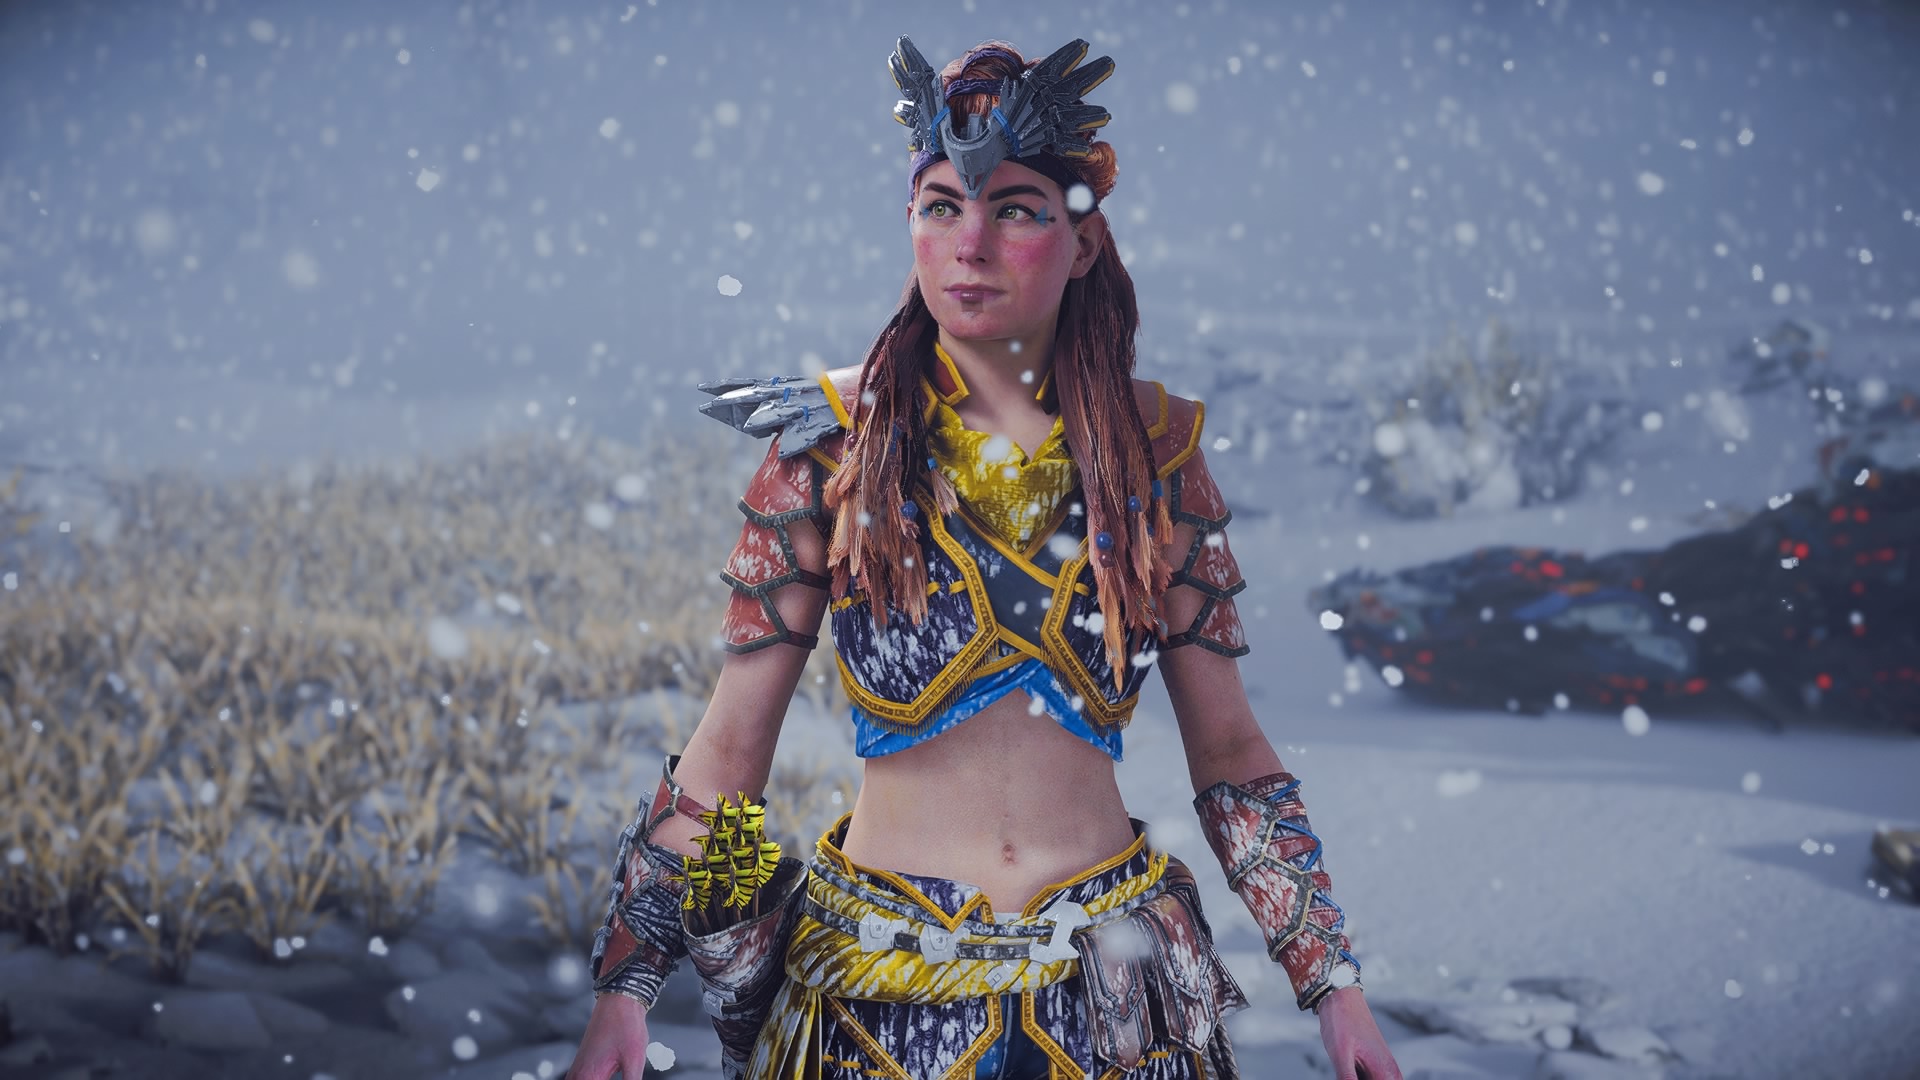 General 1920x1080 Horizon Forbidden West video games screen shot guerrilla games snow video game characters CGI Aloy PlayStation 4 video game art standing video game girls snowing looking away long hair brunette bare midriff blurred blurry background